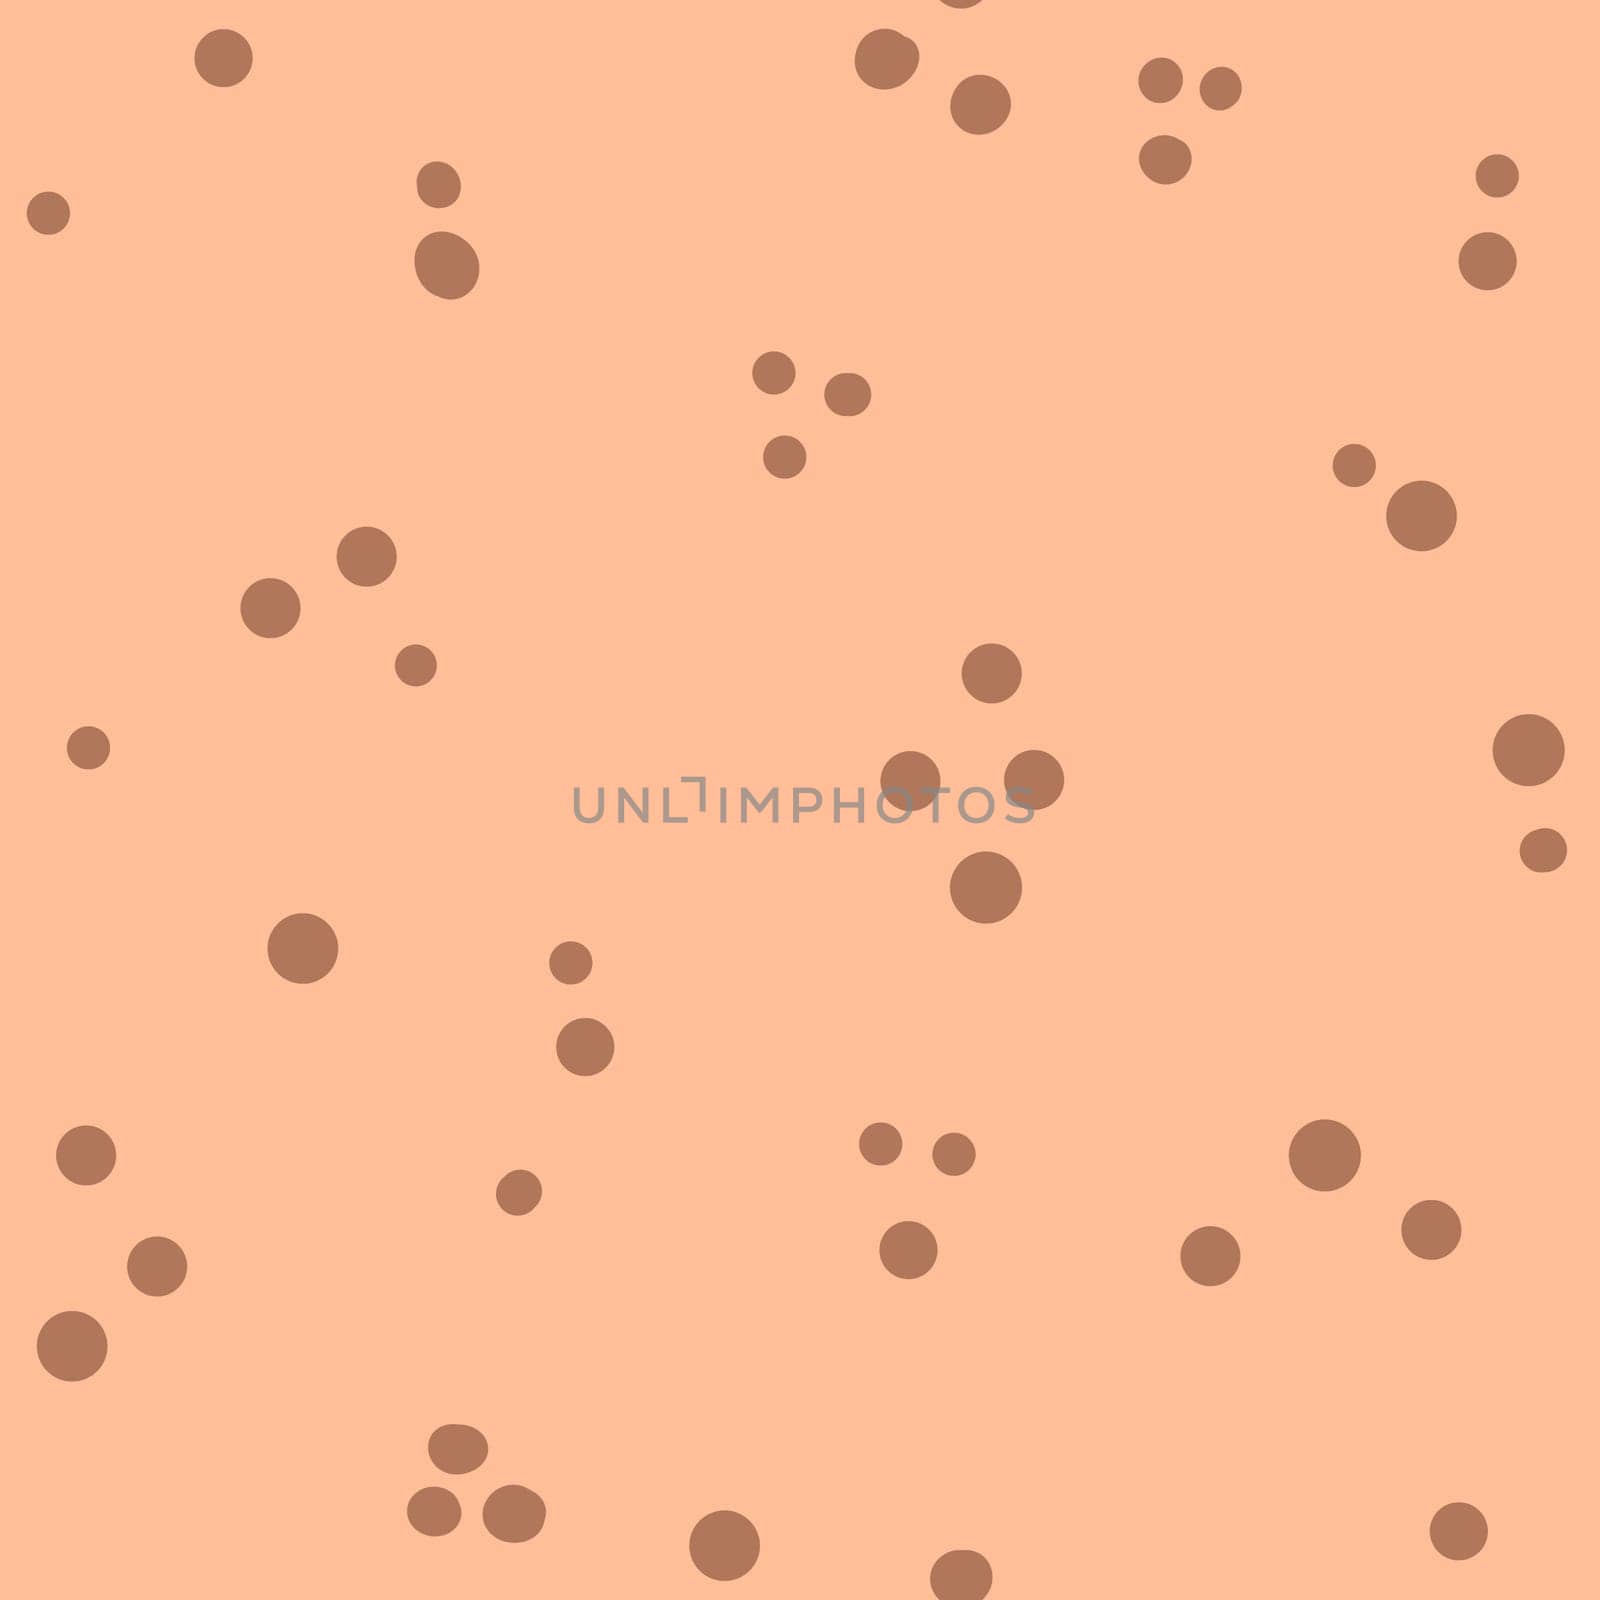 Seamless hand drawn pattern on peach fuzz isolated background pastel neutral beige apricot blush polka dot. Organic soft colors abstract light white round circles trendy modern minimalist style, color of the year print